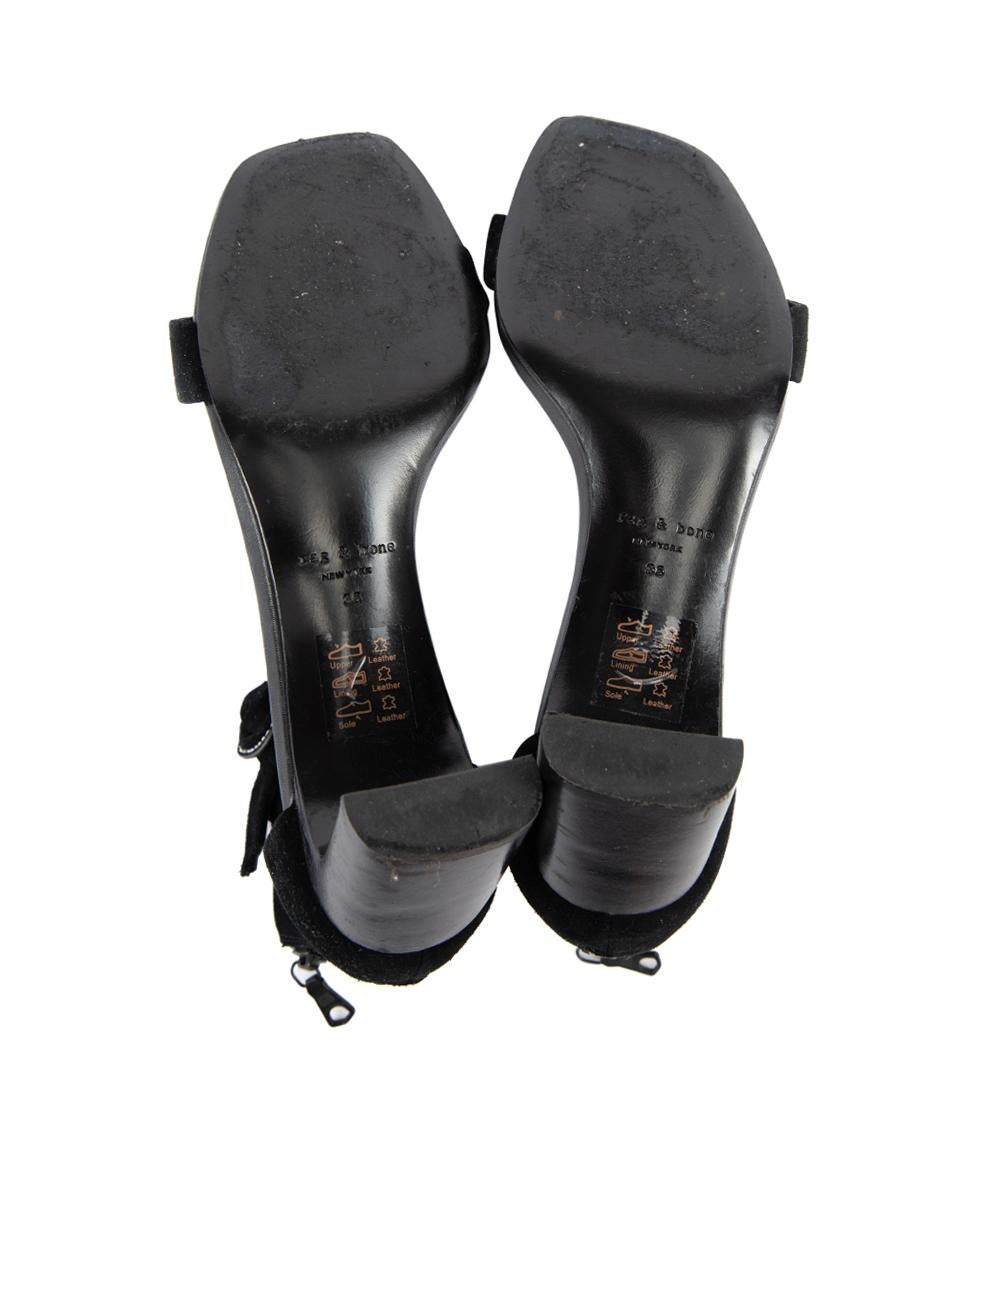 Pre-Loved Rag & Bone Women's Black Suede Ankle Strap Heeled Sandals In Excellent Condition For Sale In London, GB